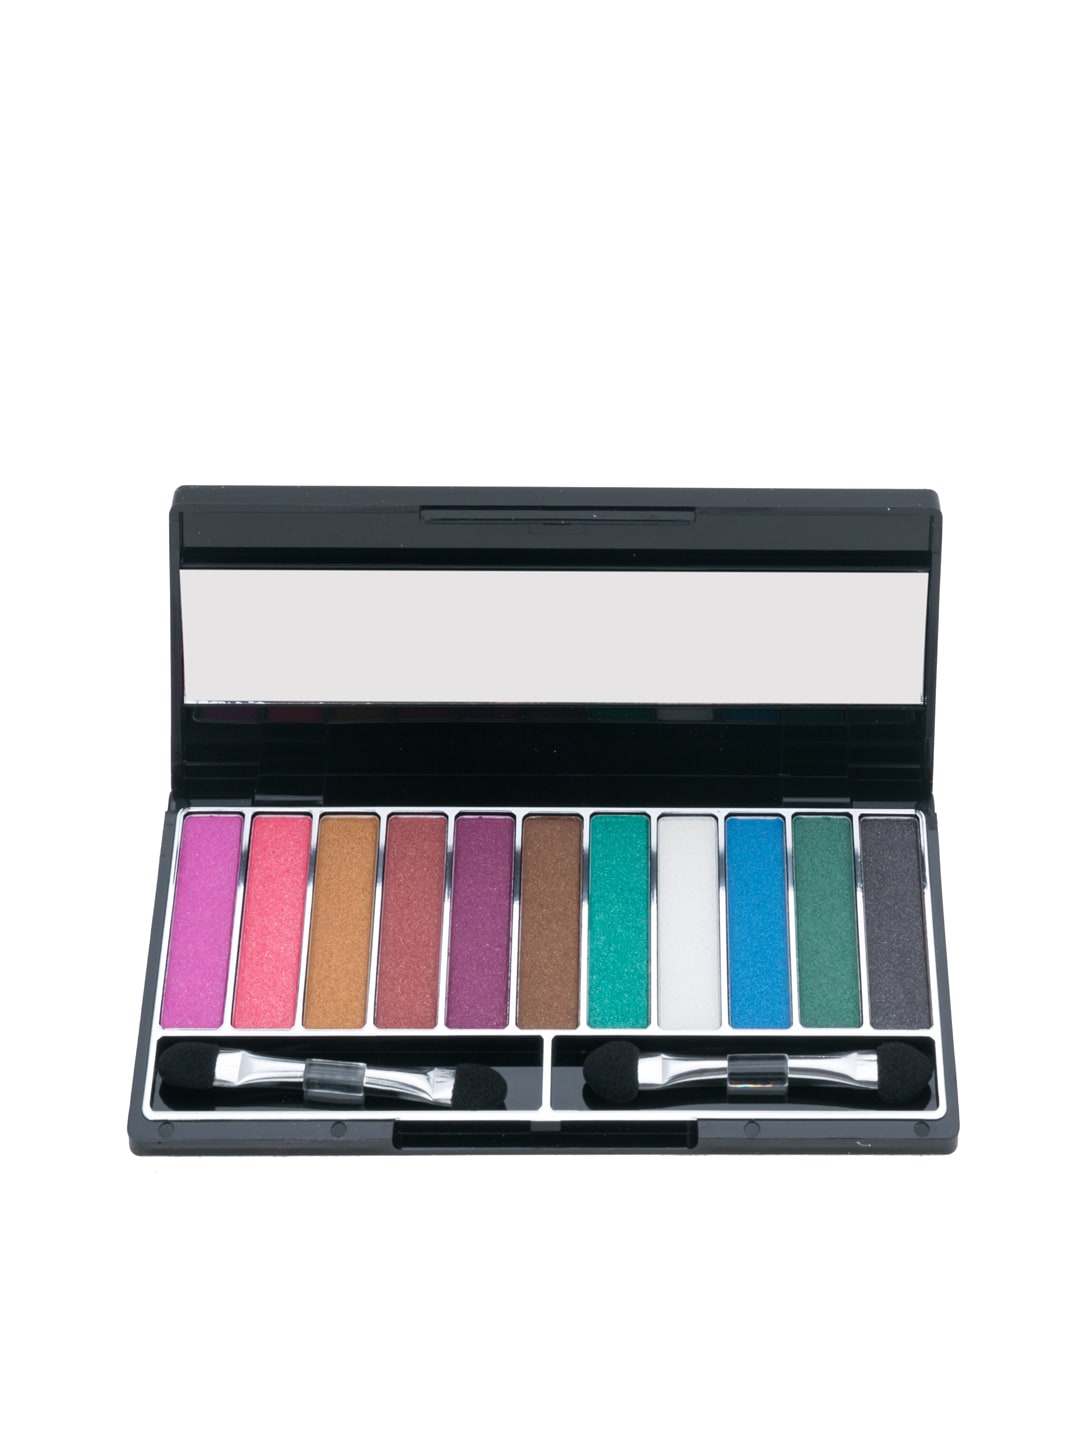 Miss Claire Eyeshadow Kit 3716-11-2 Price in India